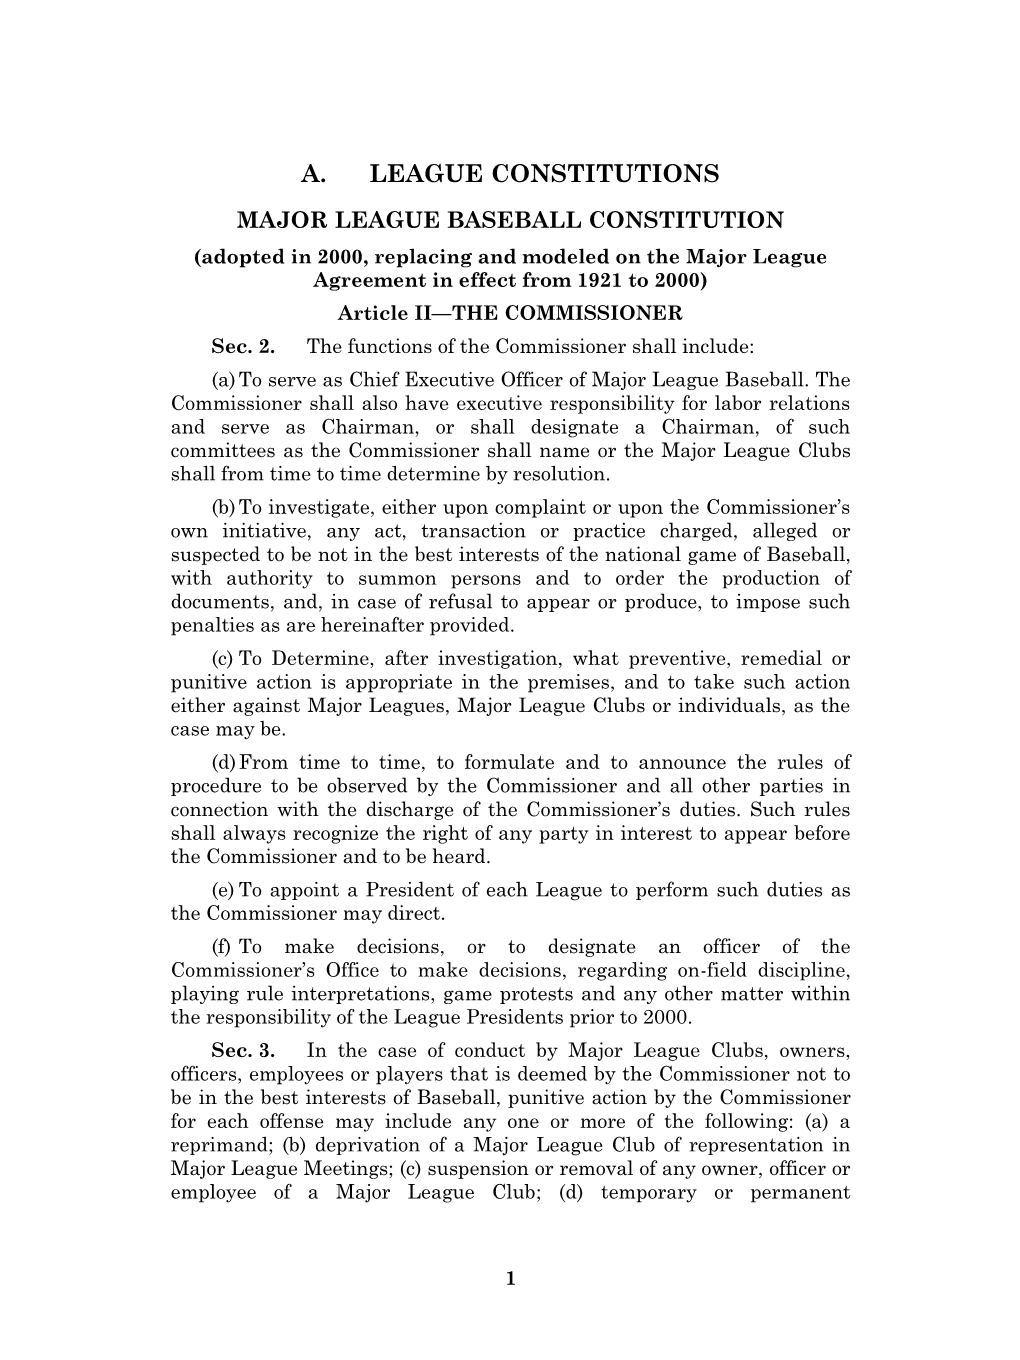 MAJOR LEAGUE BASEBALL CONSTITUTION (Adopted in 2000, Replacing and Modeled on the Major League Agreement in Effect from 1921 to 2000) Article II—THE COMMISSIONER Sec